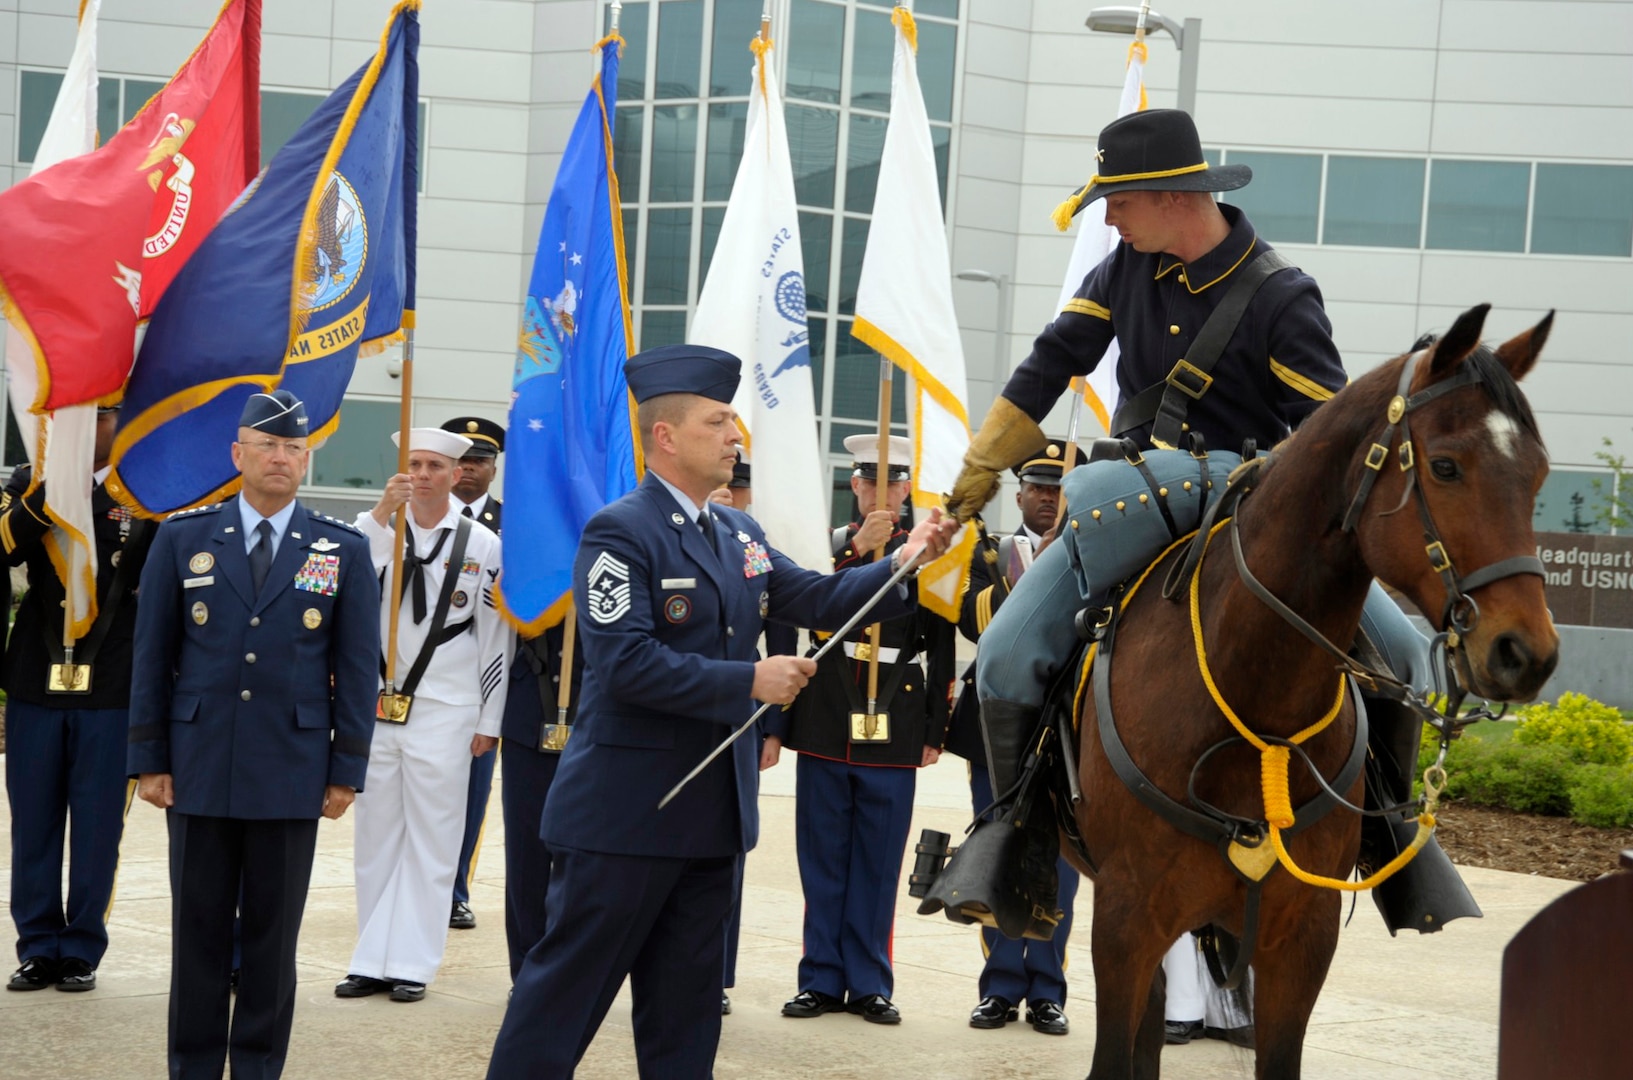 Command Chief Master Sgt. W. Allen Usry, NORAD and U.S. Northern Command command senior enlisted leader, hands the Noncommissioned Officer's Sword to a member of the Fort Carson Mounted Color Guard during the May 21 NORAD and U.S. Northern Command's Change of Responsibility ceremony at Peterson Air Force Base, Colo. The sword is a symbol of the ability and prestige of enlisted leaders in the commands. The command sergeant major-as the senior enlisted leader- is the keeper of tradition for the unit. The emblematic passing of the sword of office signifies the transfer of this sacred trust from one command senior enlisted leader to another.